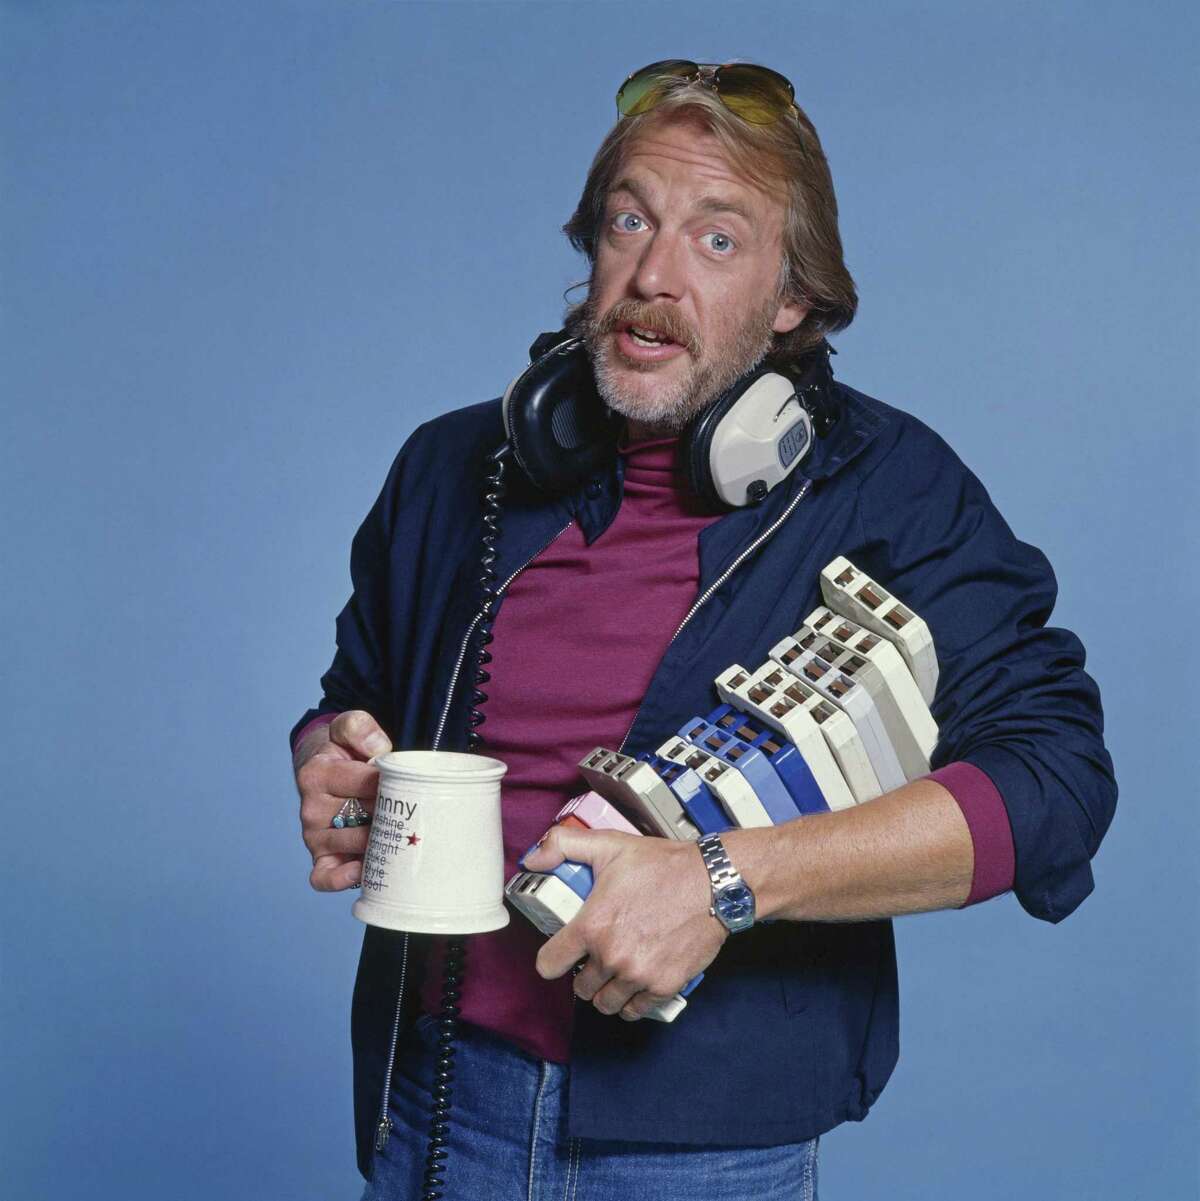 Howard Hesseman starred as morning DJ Dr. Johnny Fever on “WKRP in Cincinnati,” a hit CBS sitcom in the late 1970s and early ’80s.